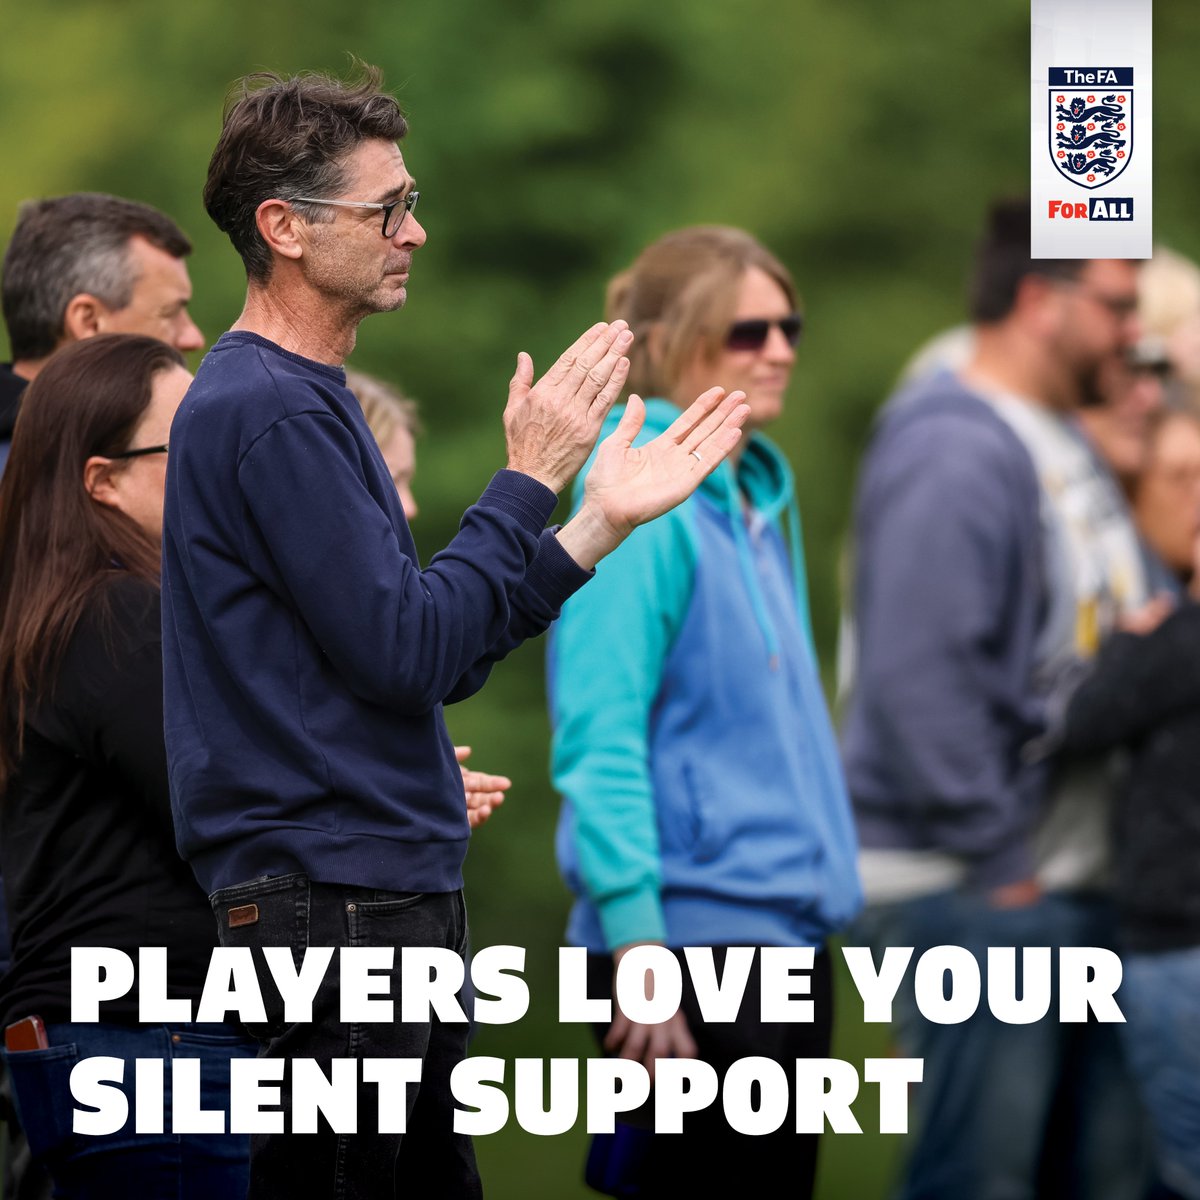 We'll be supporting @EnglandFootball's National Silent Support Weekend on Sunday 3rd March. Players often say too much noise from the sidelines can be confusing and distracting. Younger players say the only voice they want to hear is their coach. fulltime.thefa.com/newsArticle.ht… #kyl